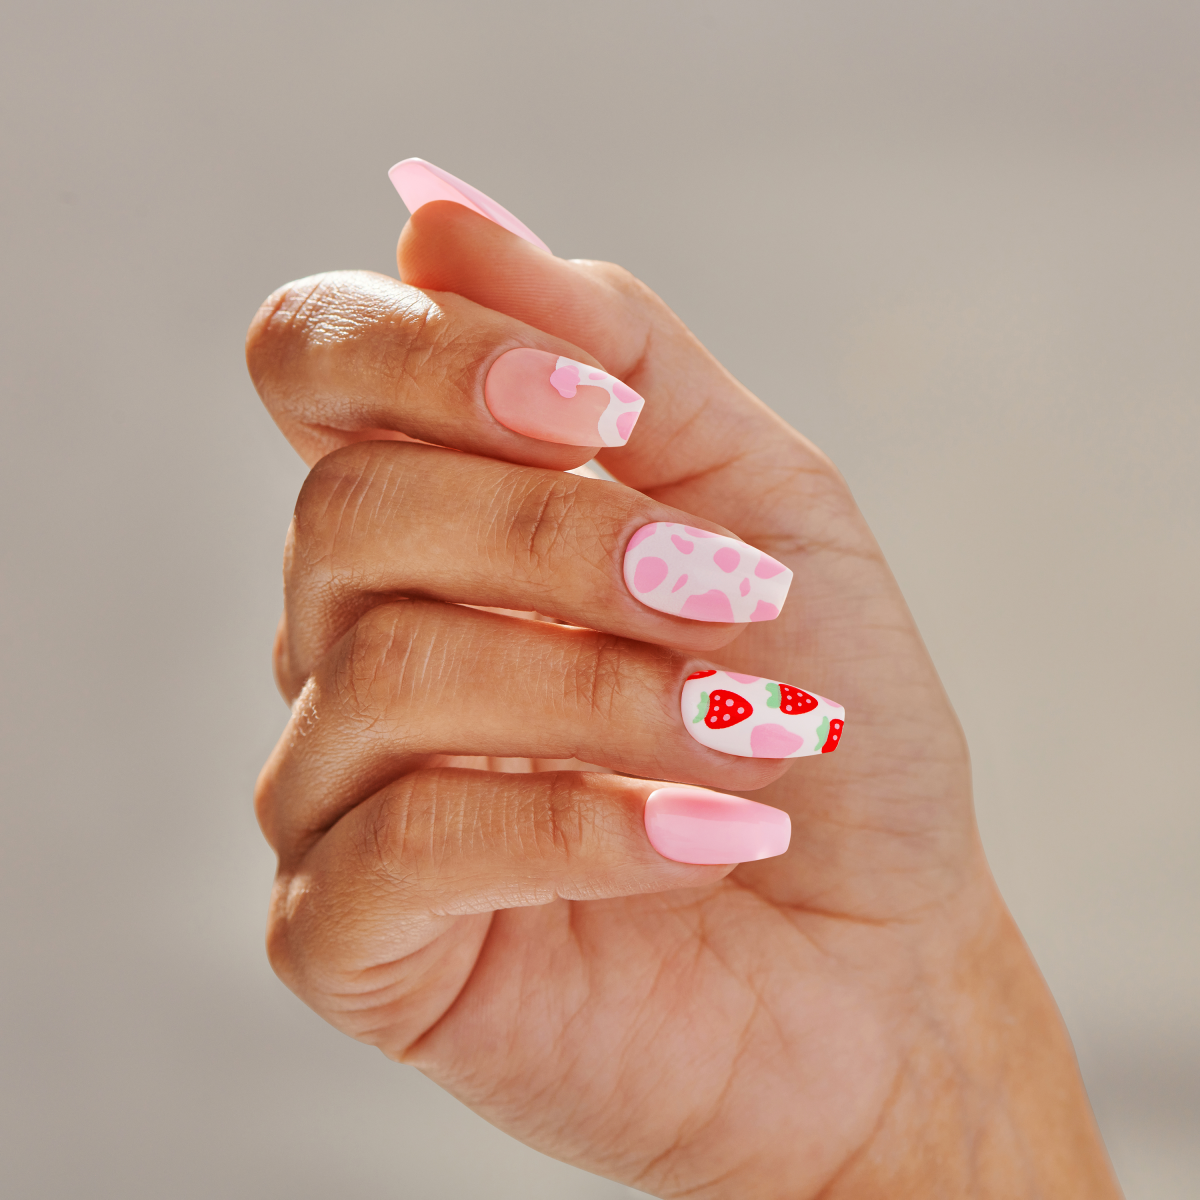 imPRESS Press-On Nails - Sweet Scoops